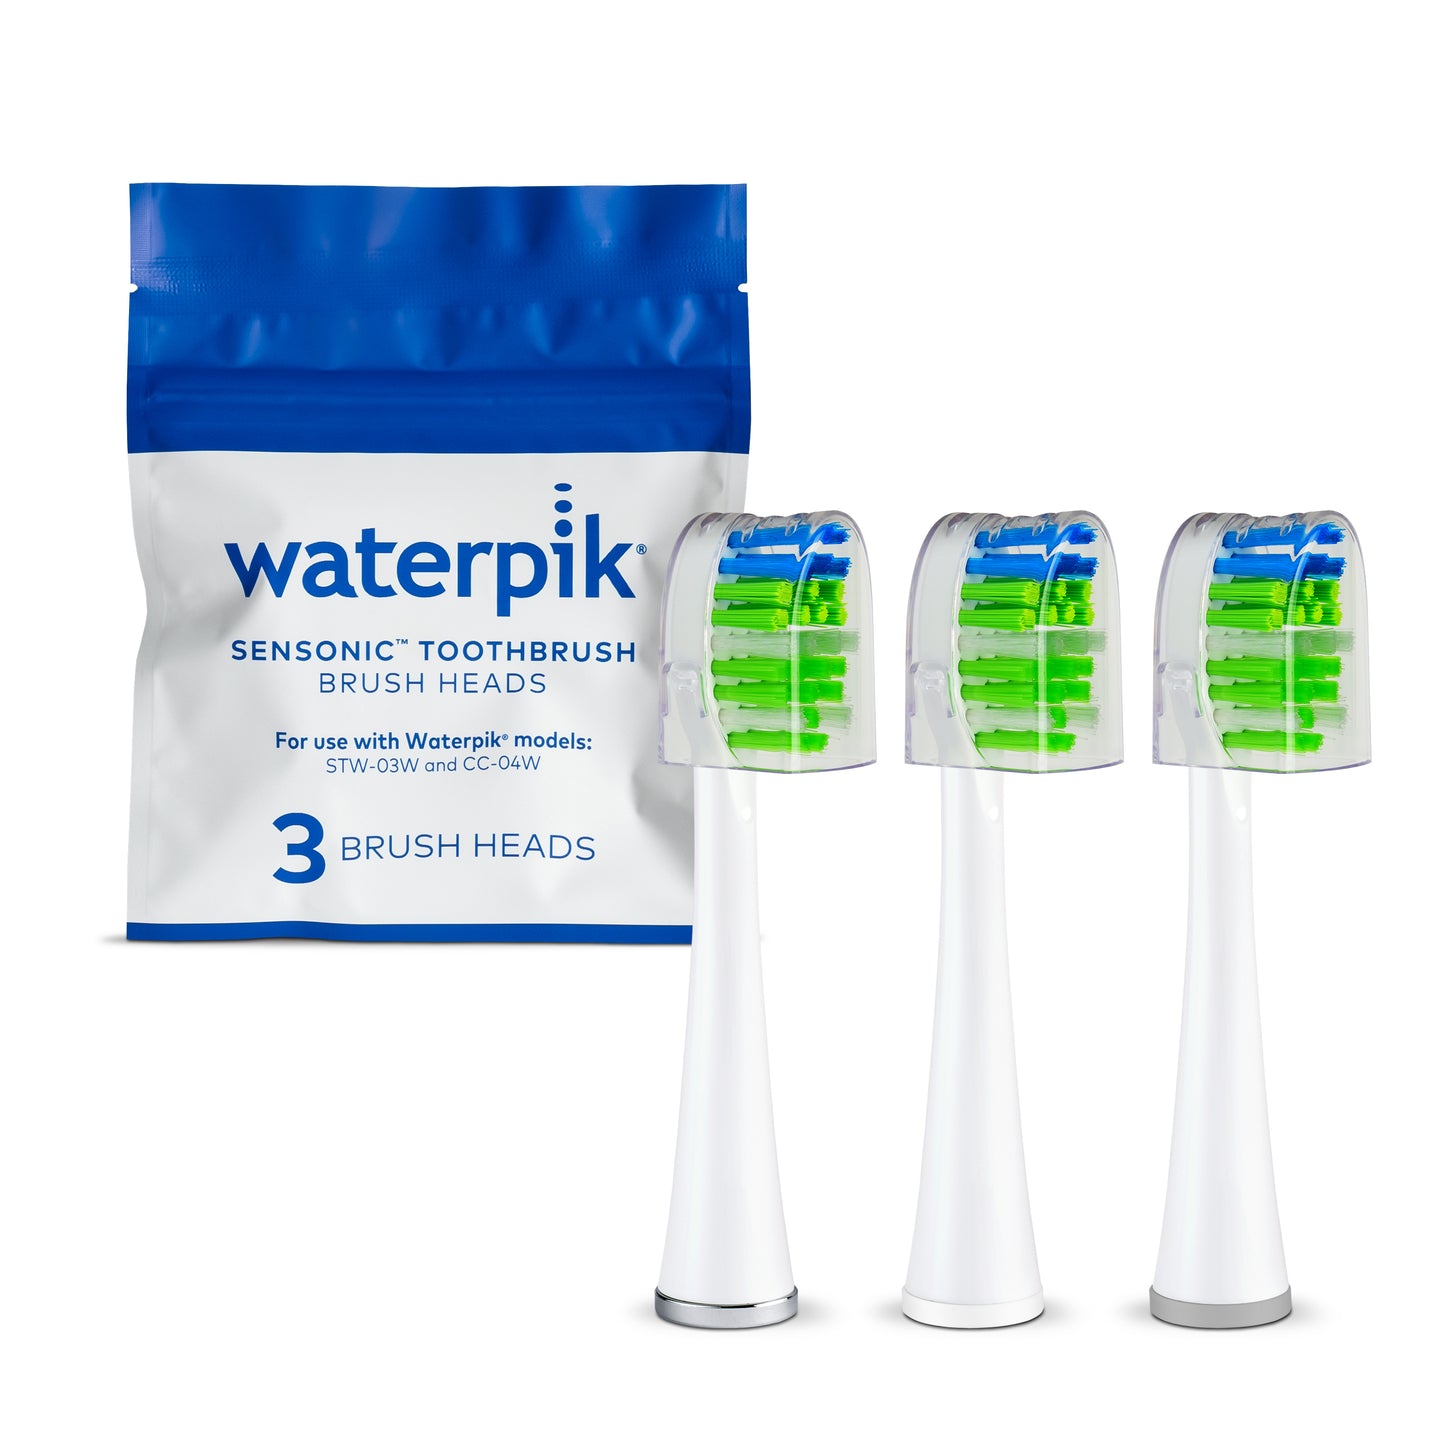 Waterpik Sensonic Contour Replacement Brush Heads With Covers and Easy Open Packaging, STWB-3WW-B